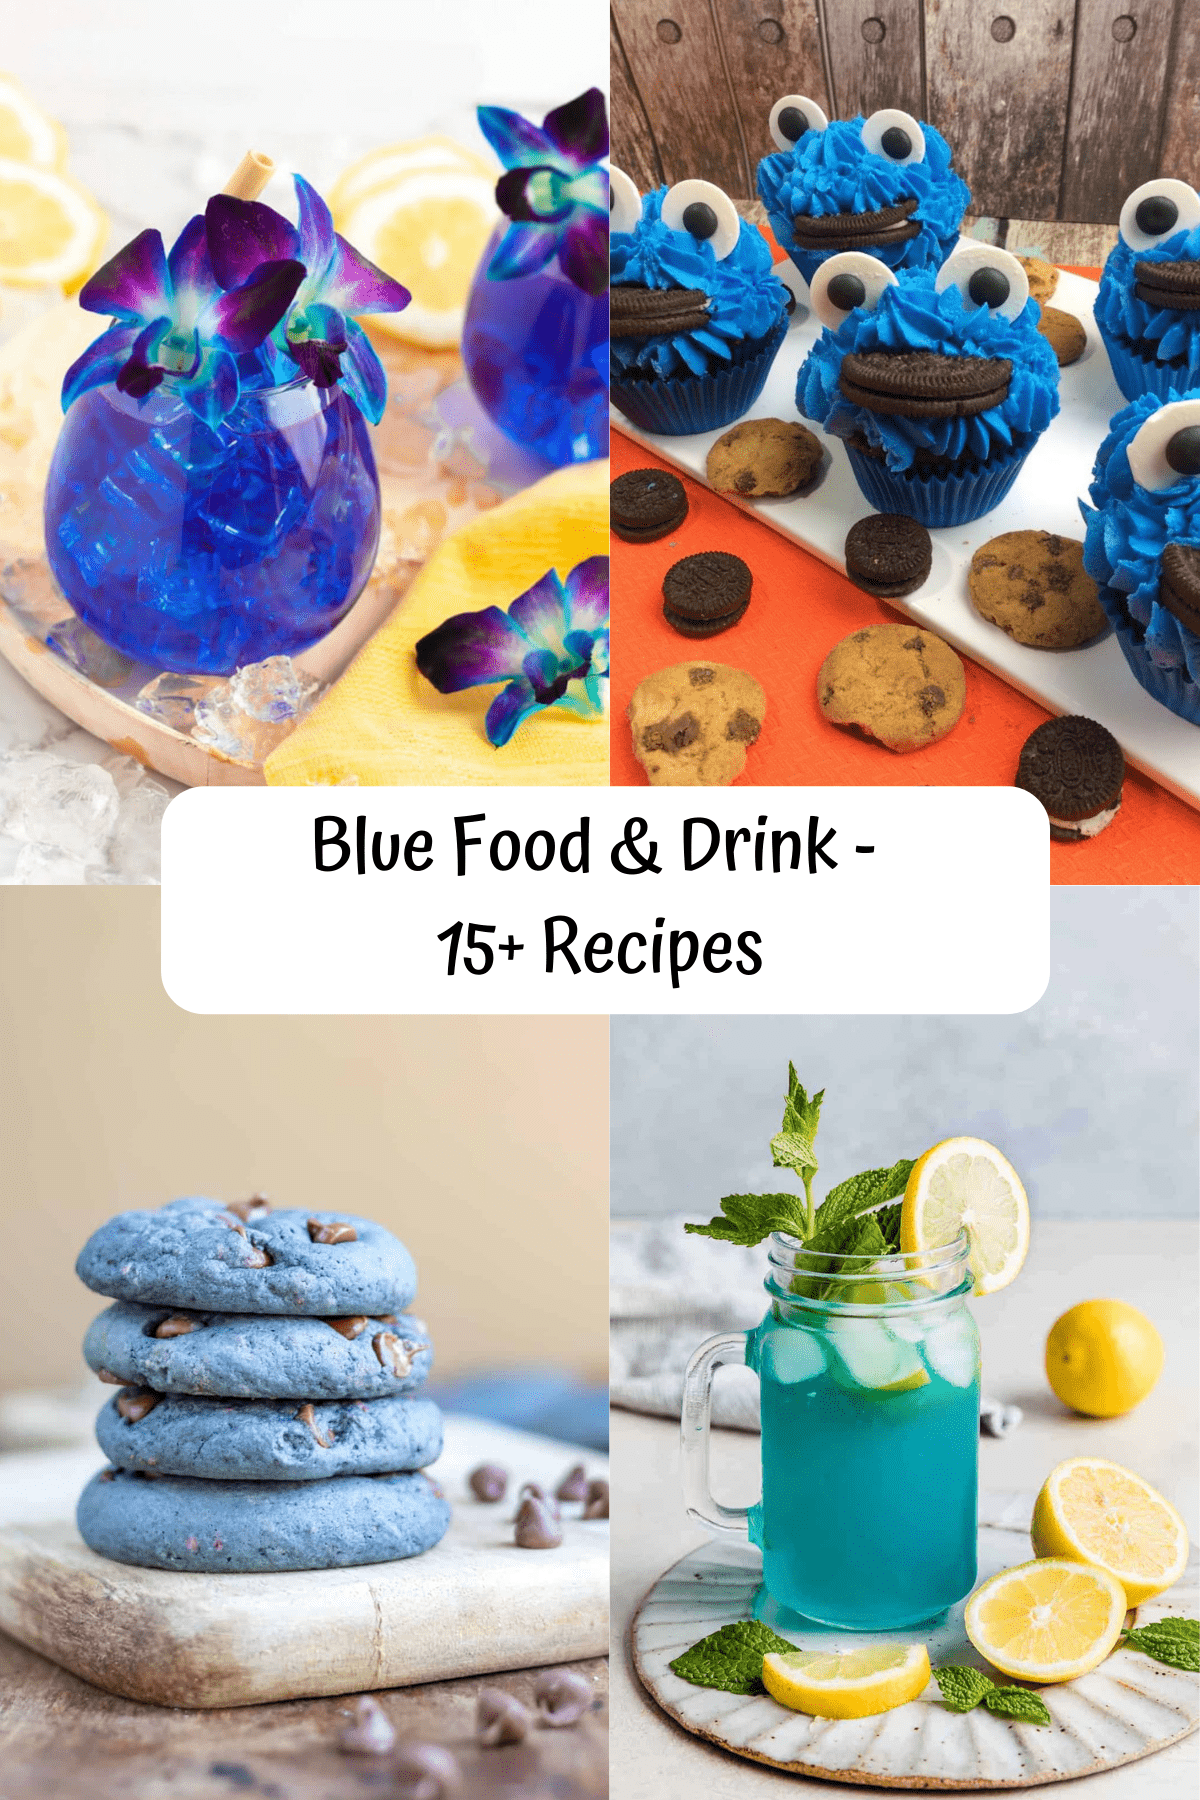  4 recipe images for blue lemonade, mocktail, cookies and cupcakes